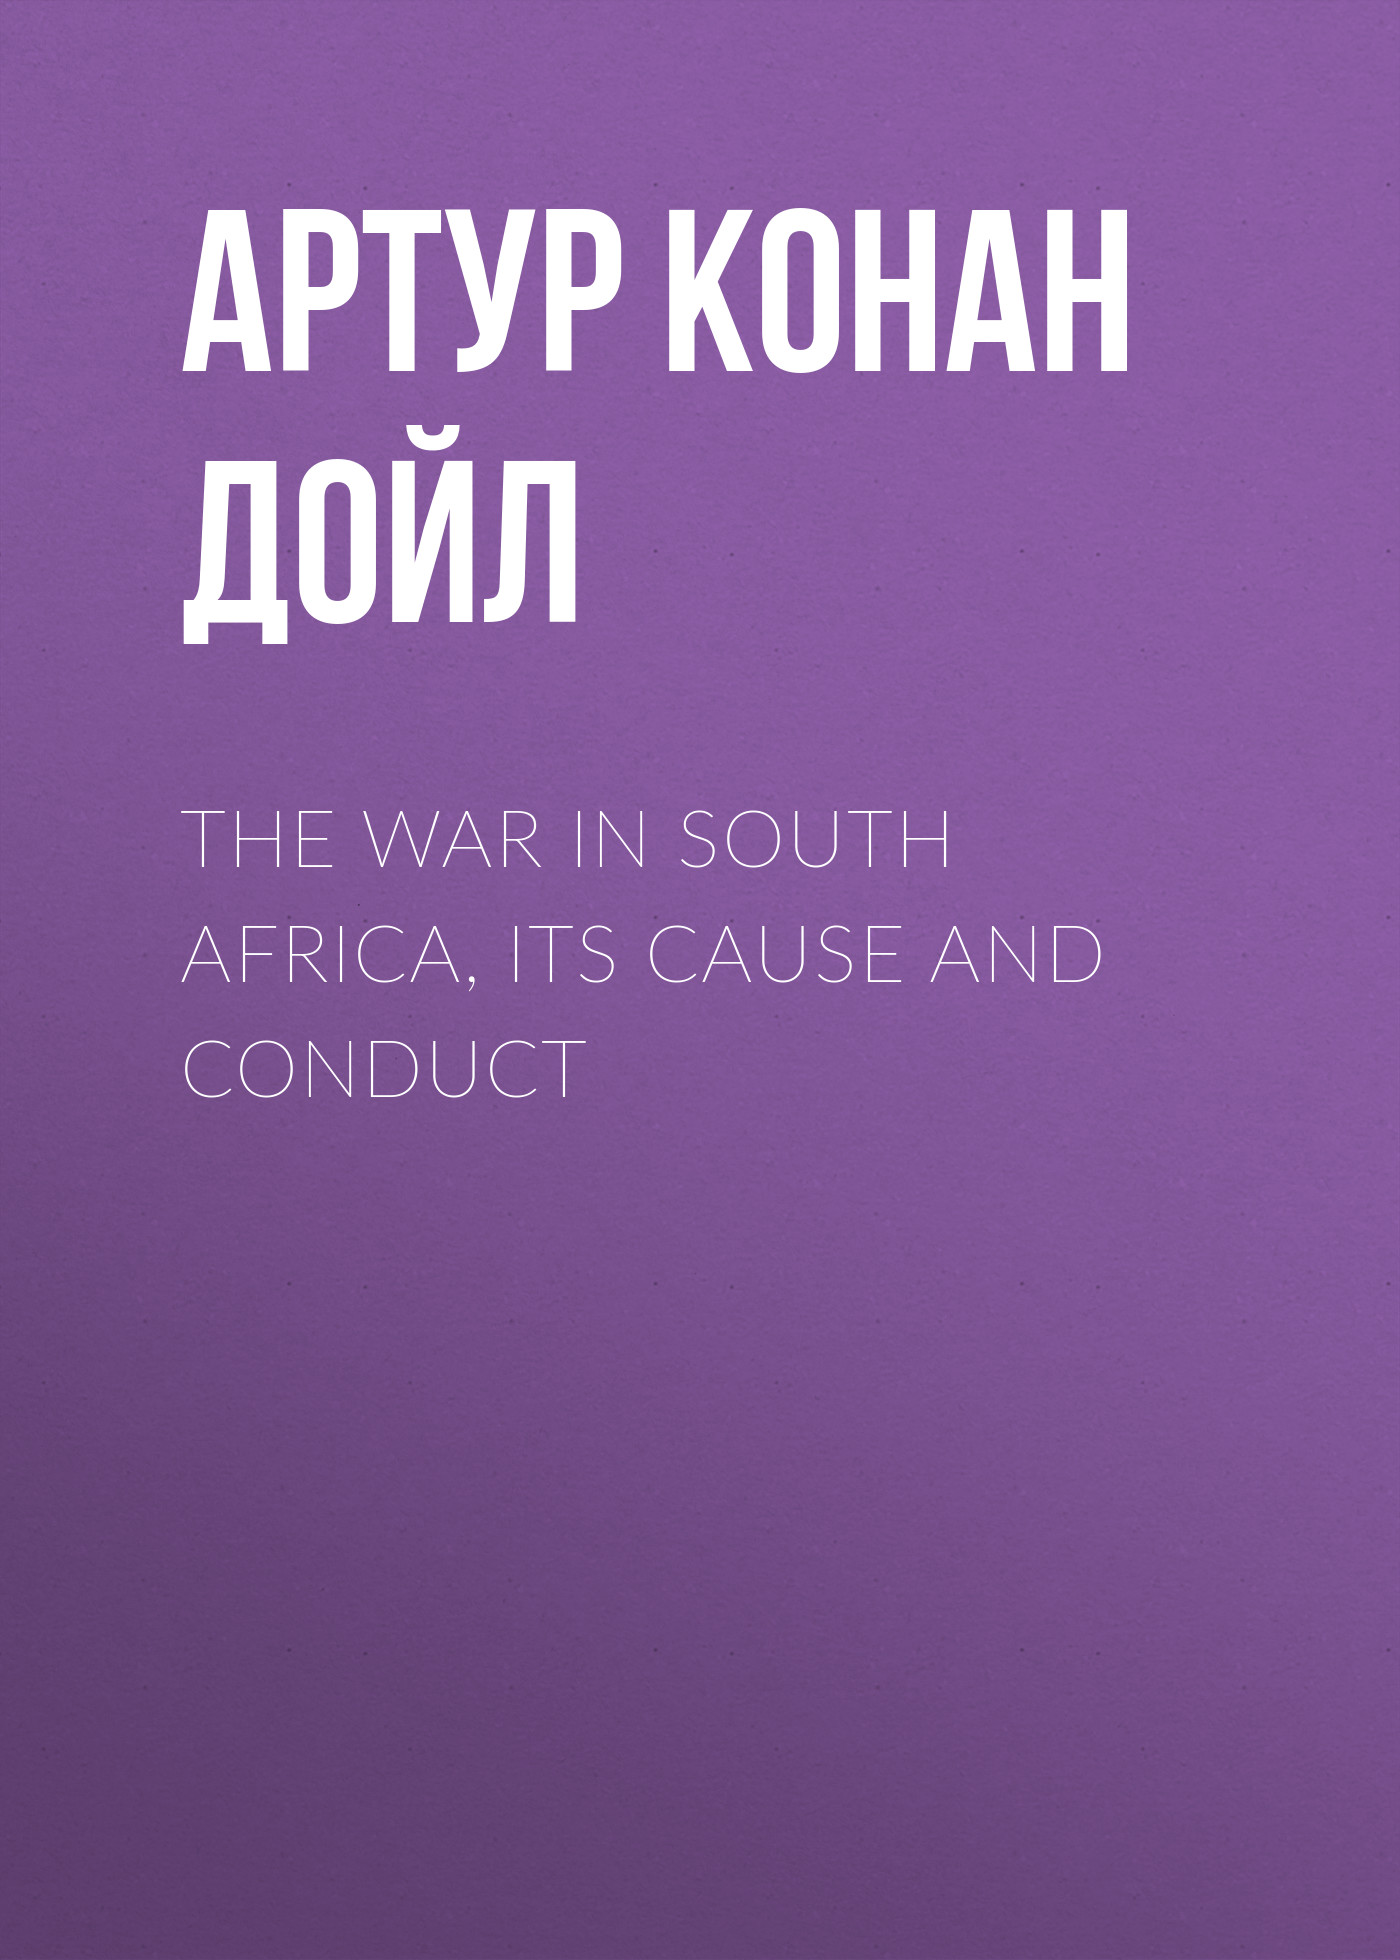 The War in South Africa, Its Cause and Conduct